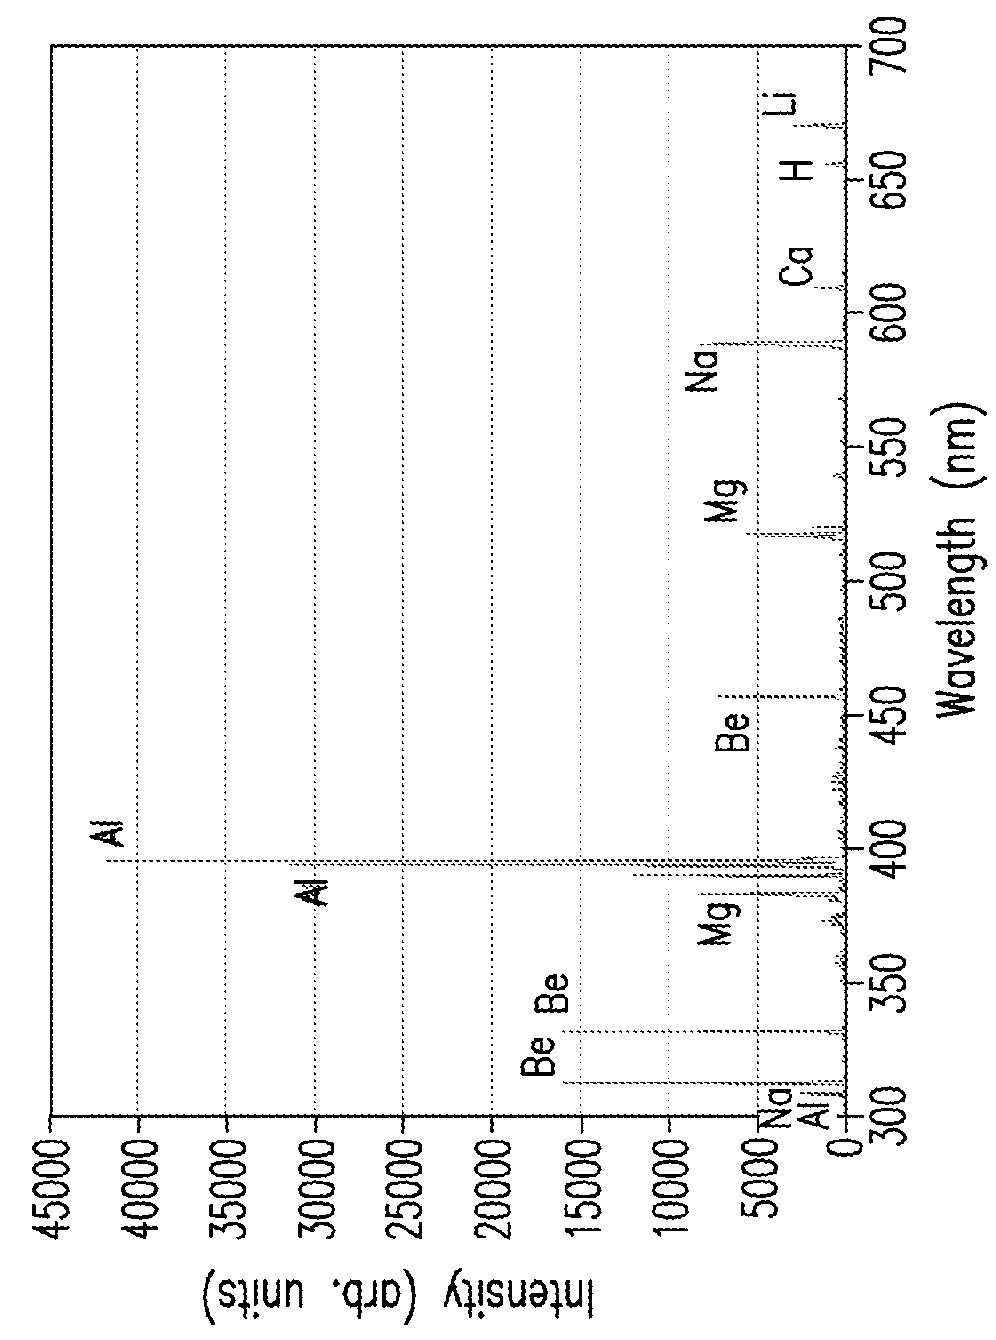 Method And System For Obtaining Geochemistry Information From Pyrolysis Induced By Laser Induced Breakdown Spectroscopy